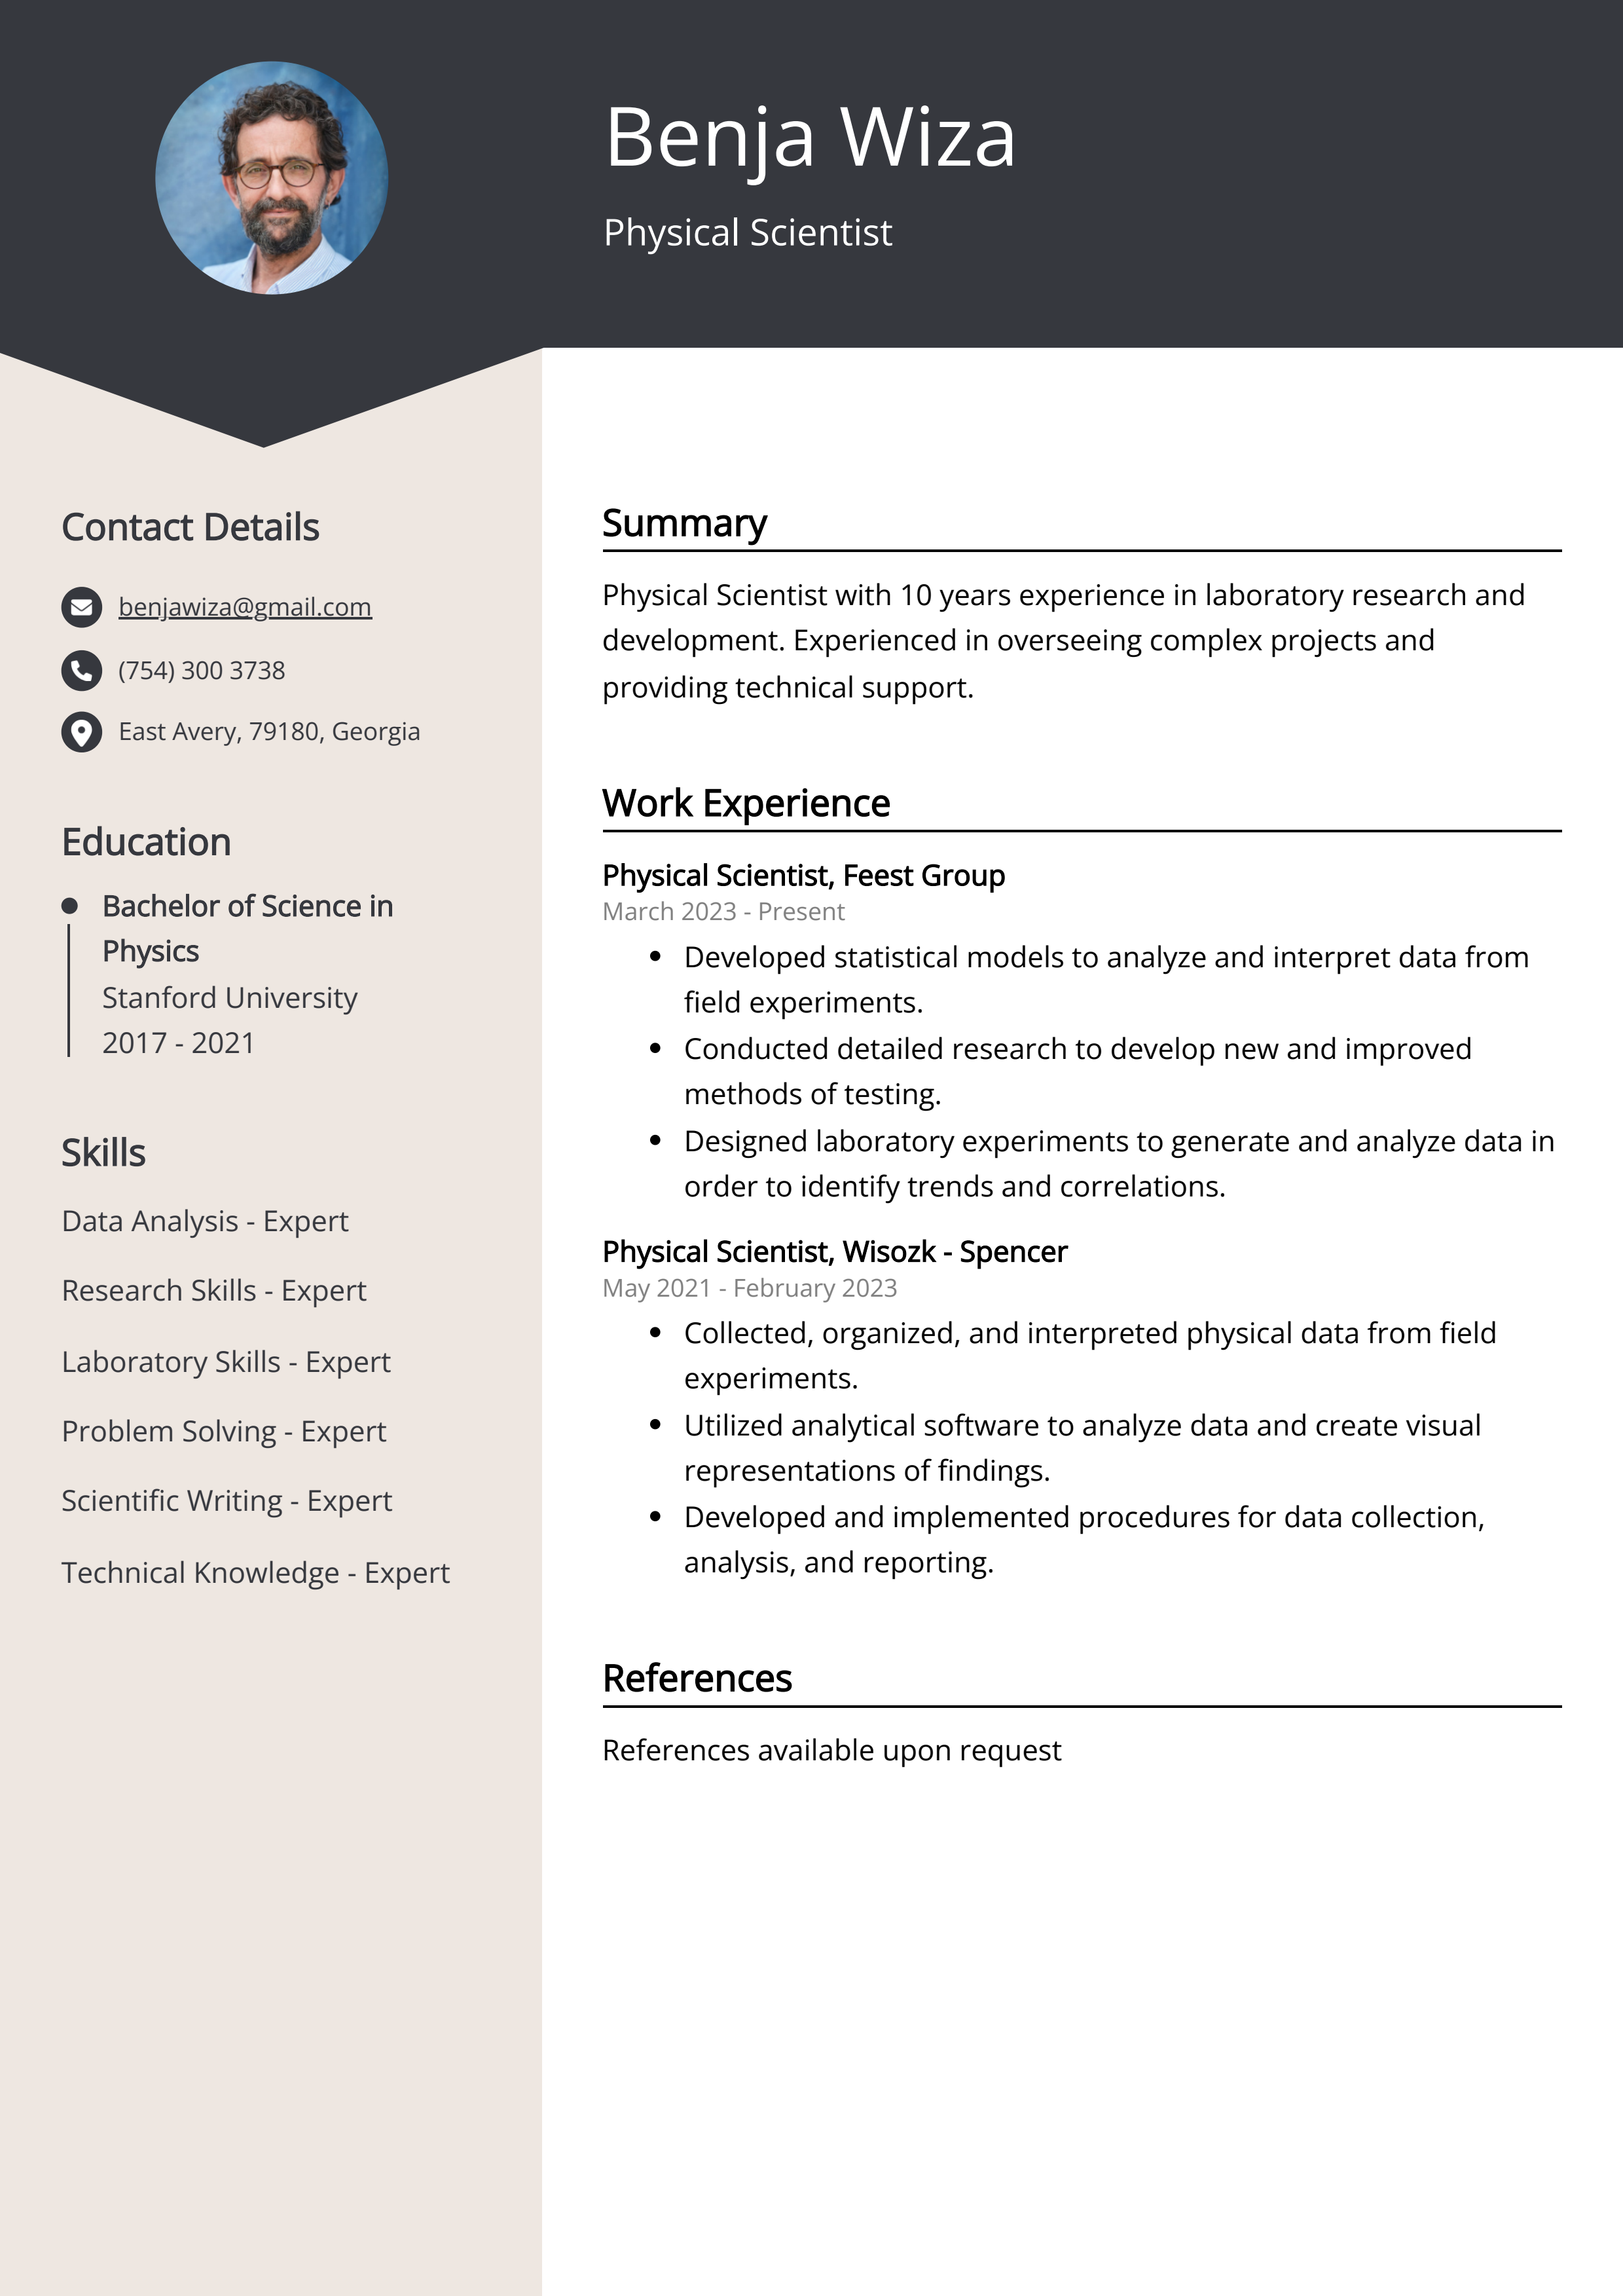 Physical Scientist CV Example